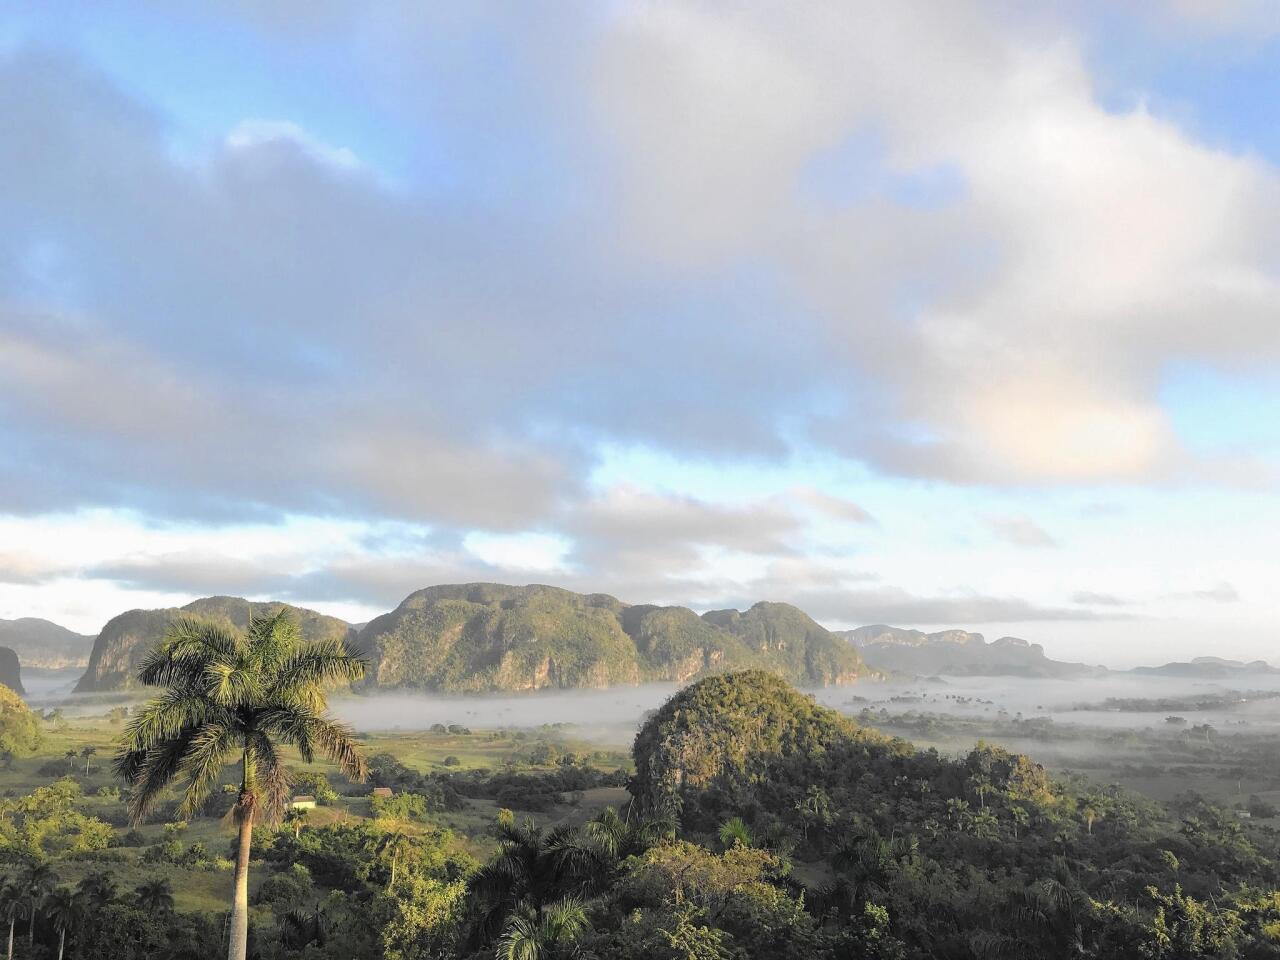 Morning fog hovers over the floor of the Vinales valley.